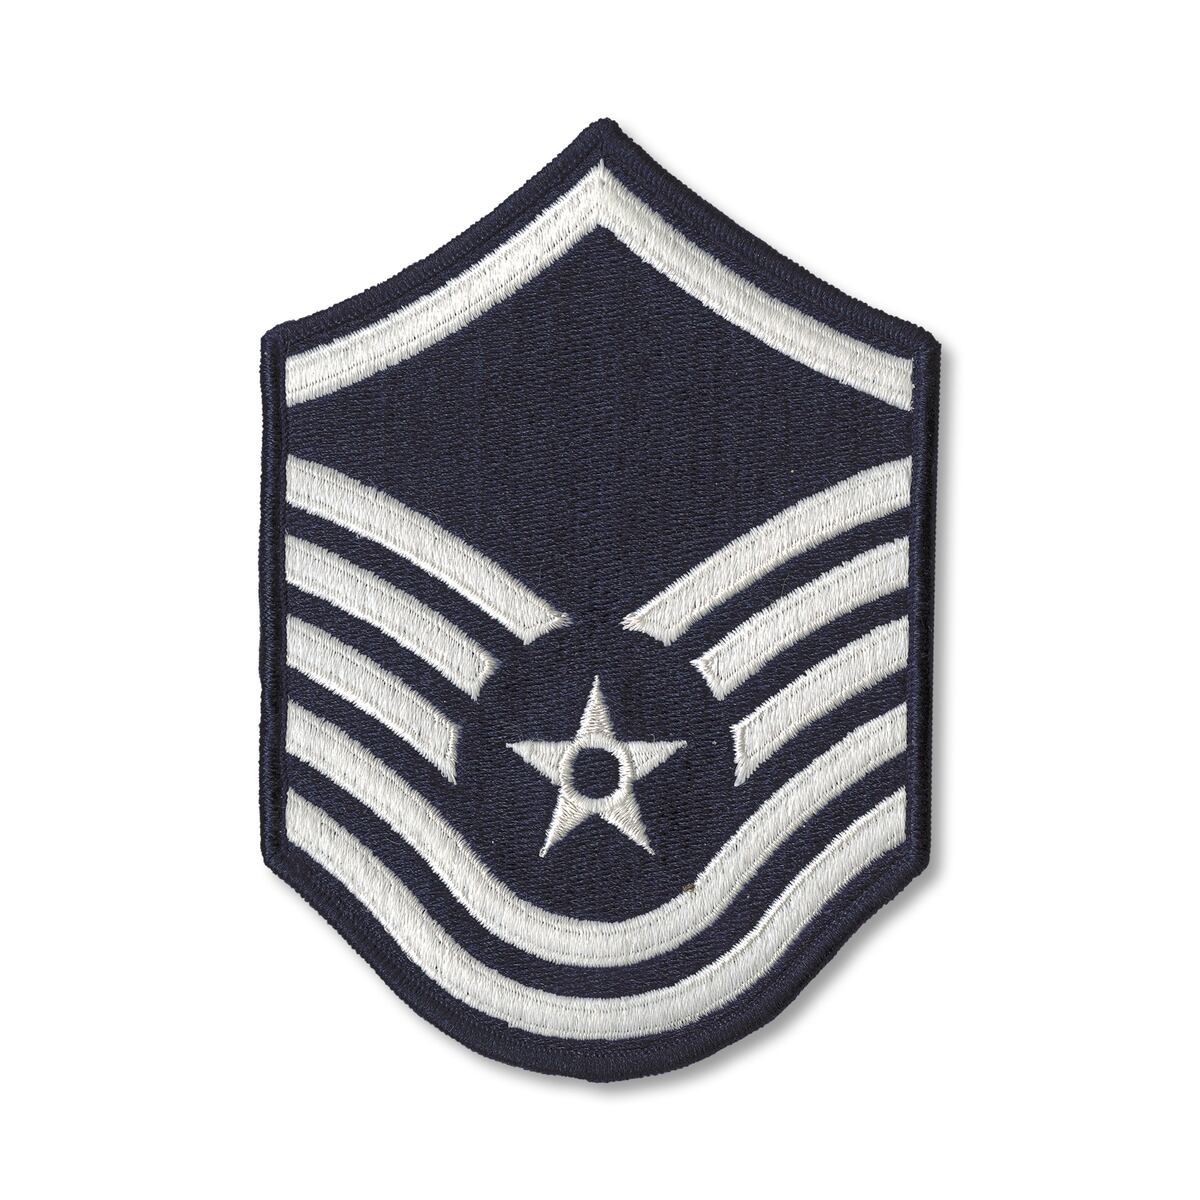 Master sergeant promotion rate hits highest point in five years